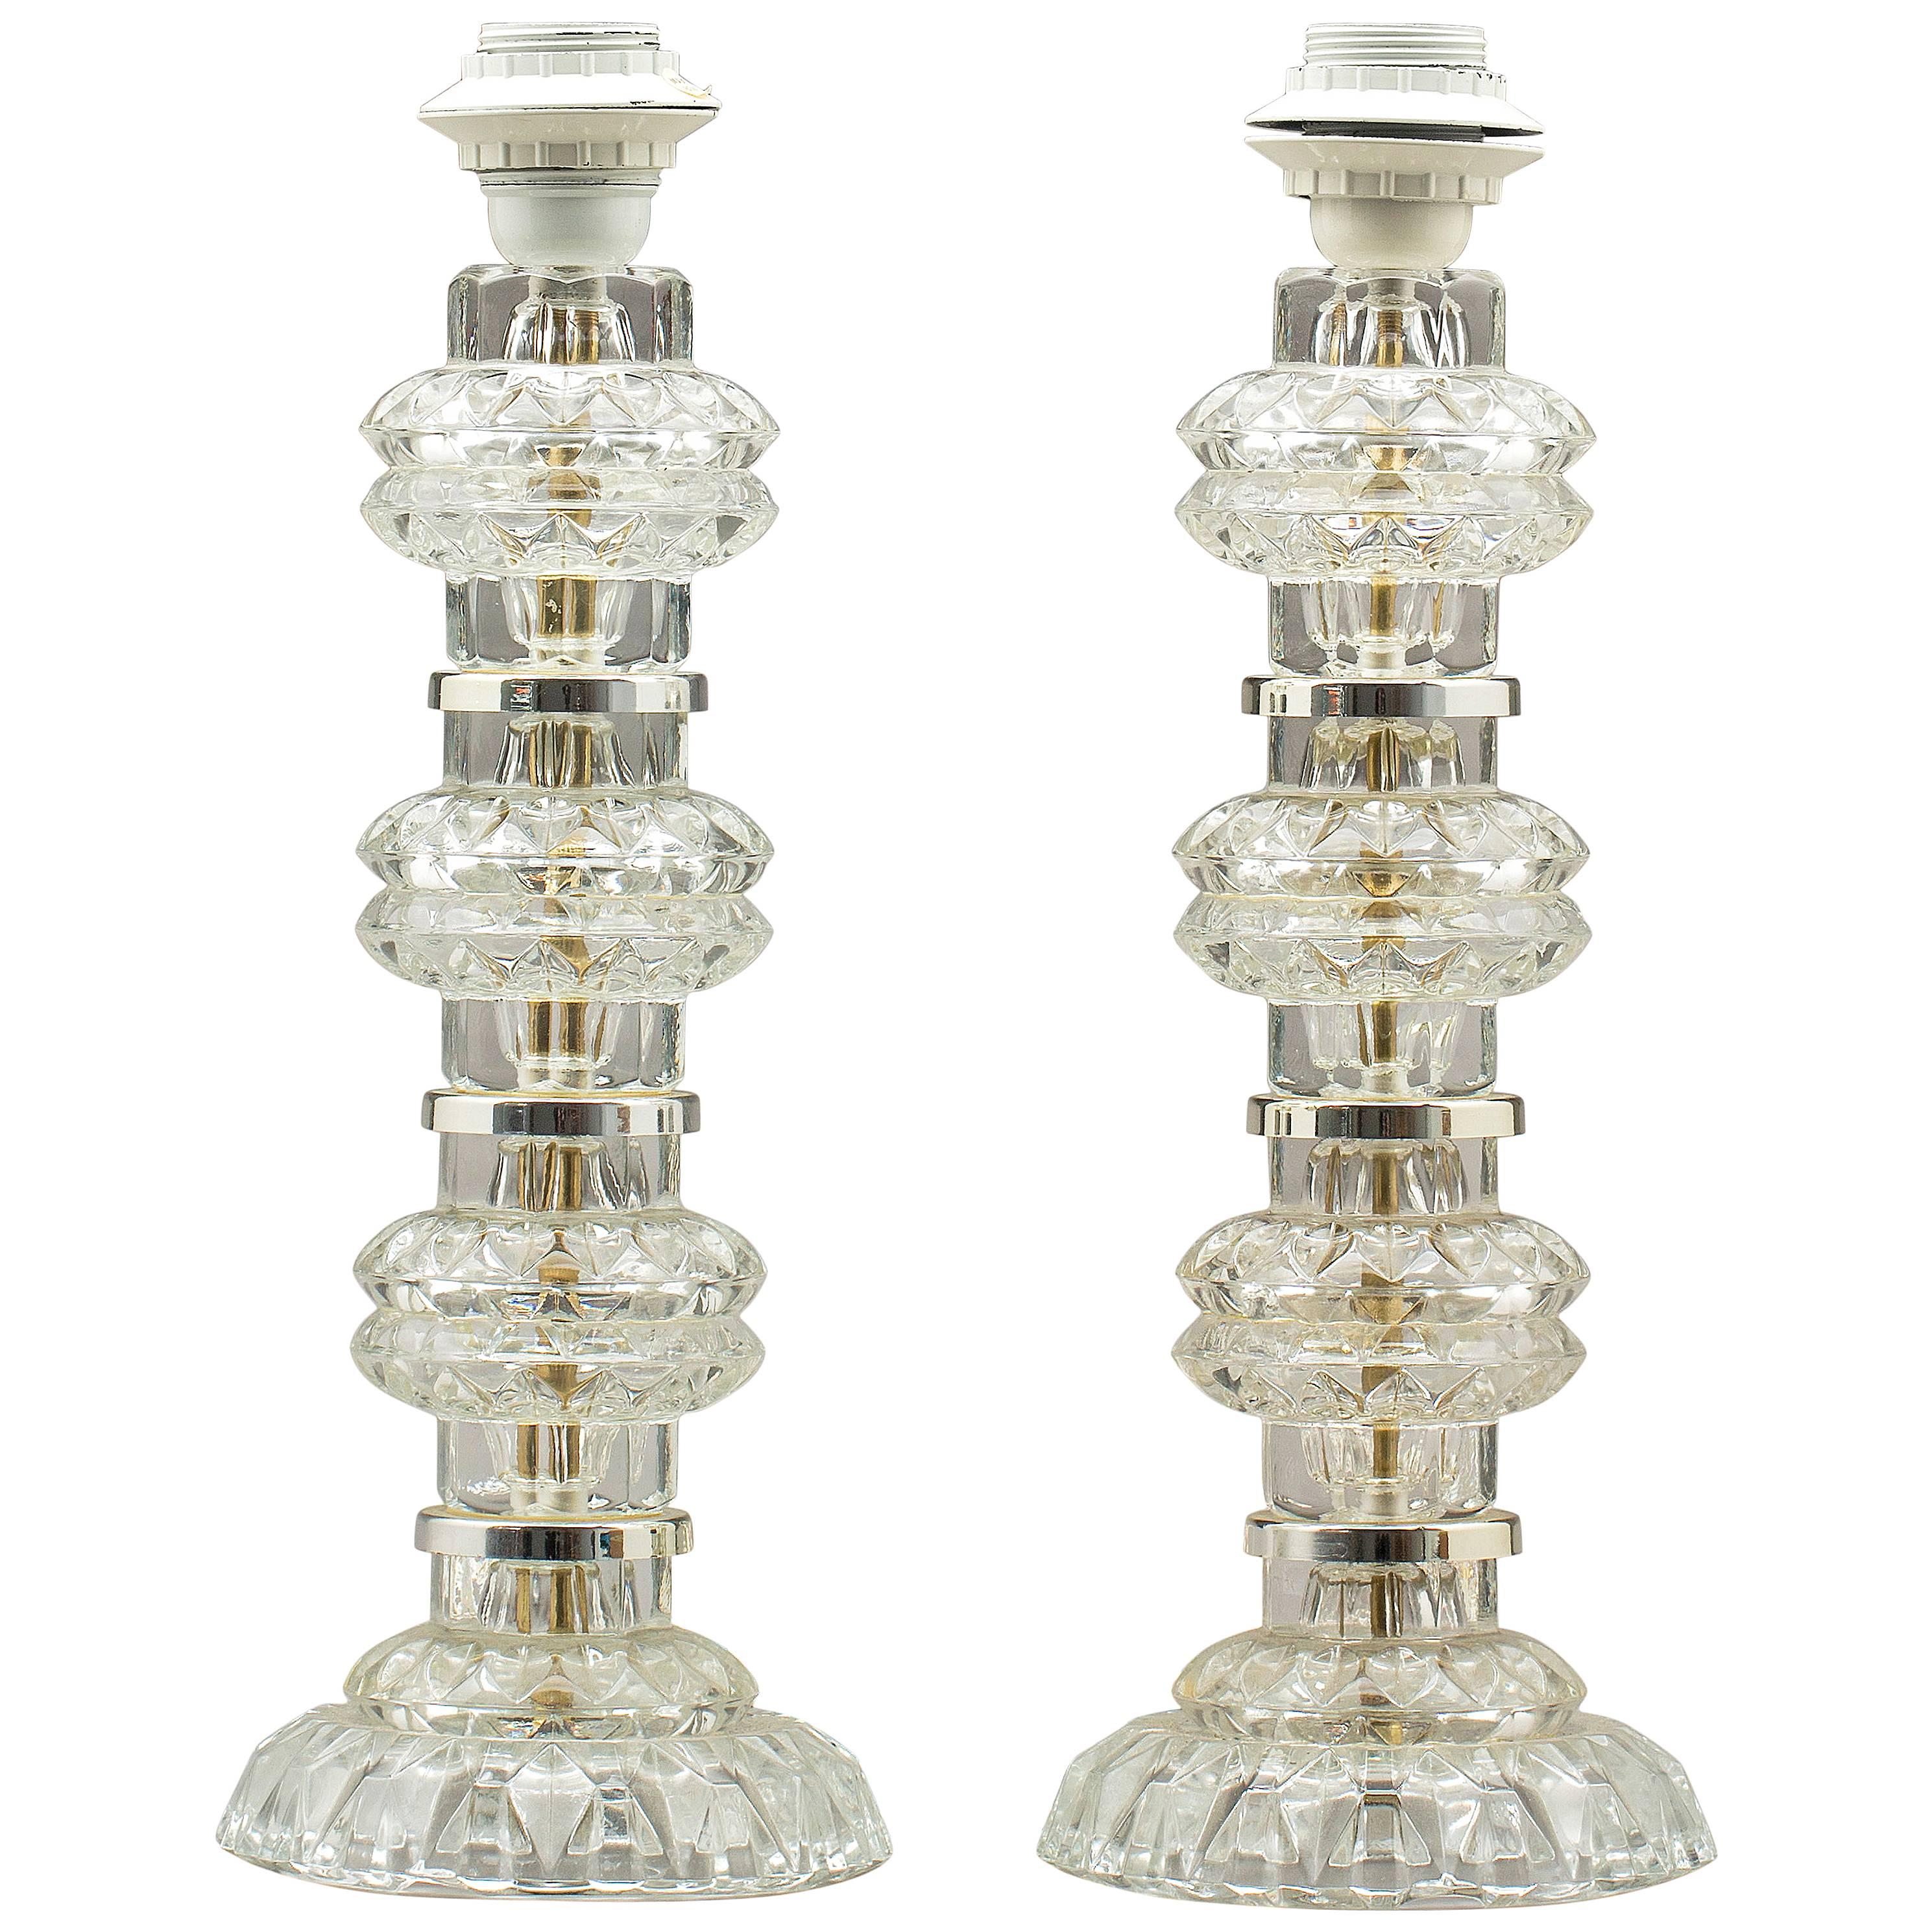 Pair of Table Lamps Attributed to Orrefors